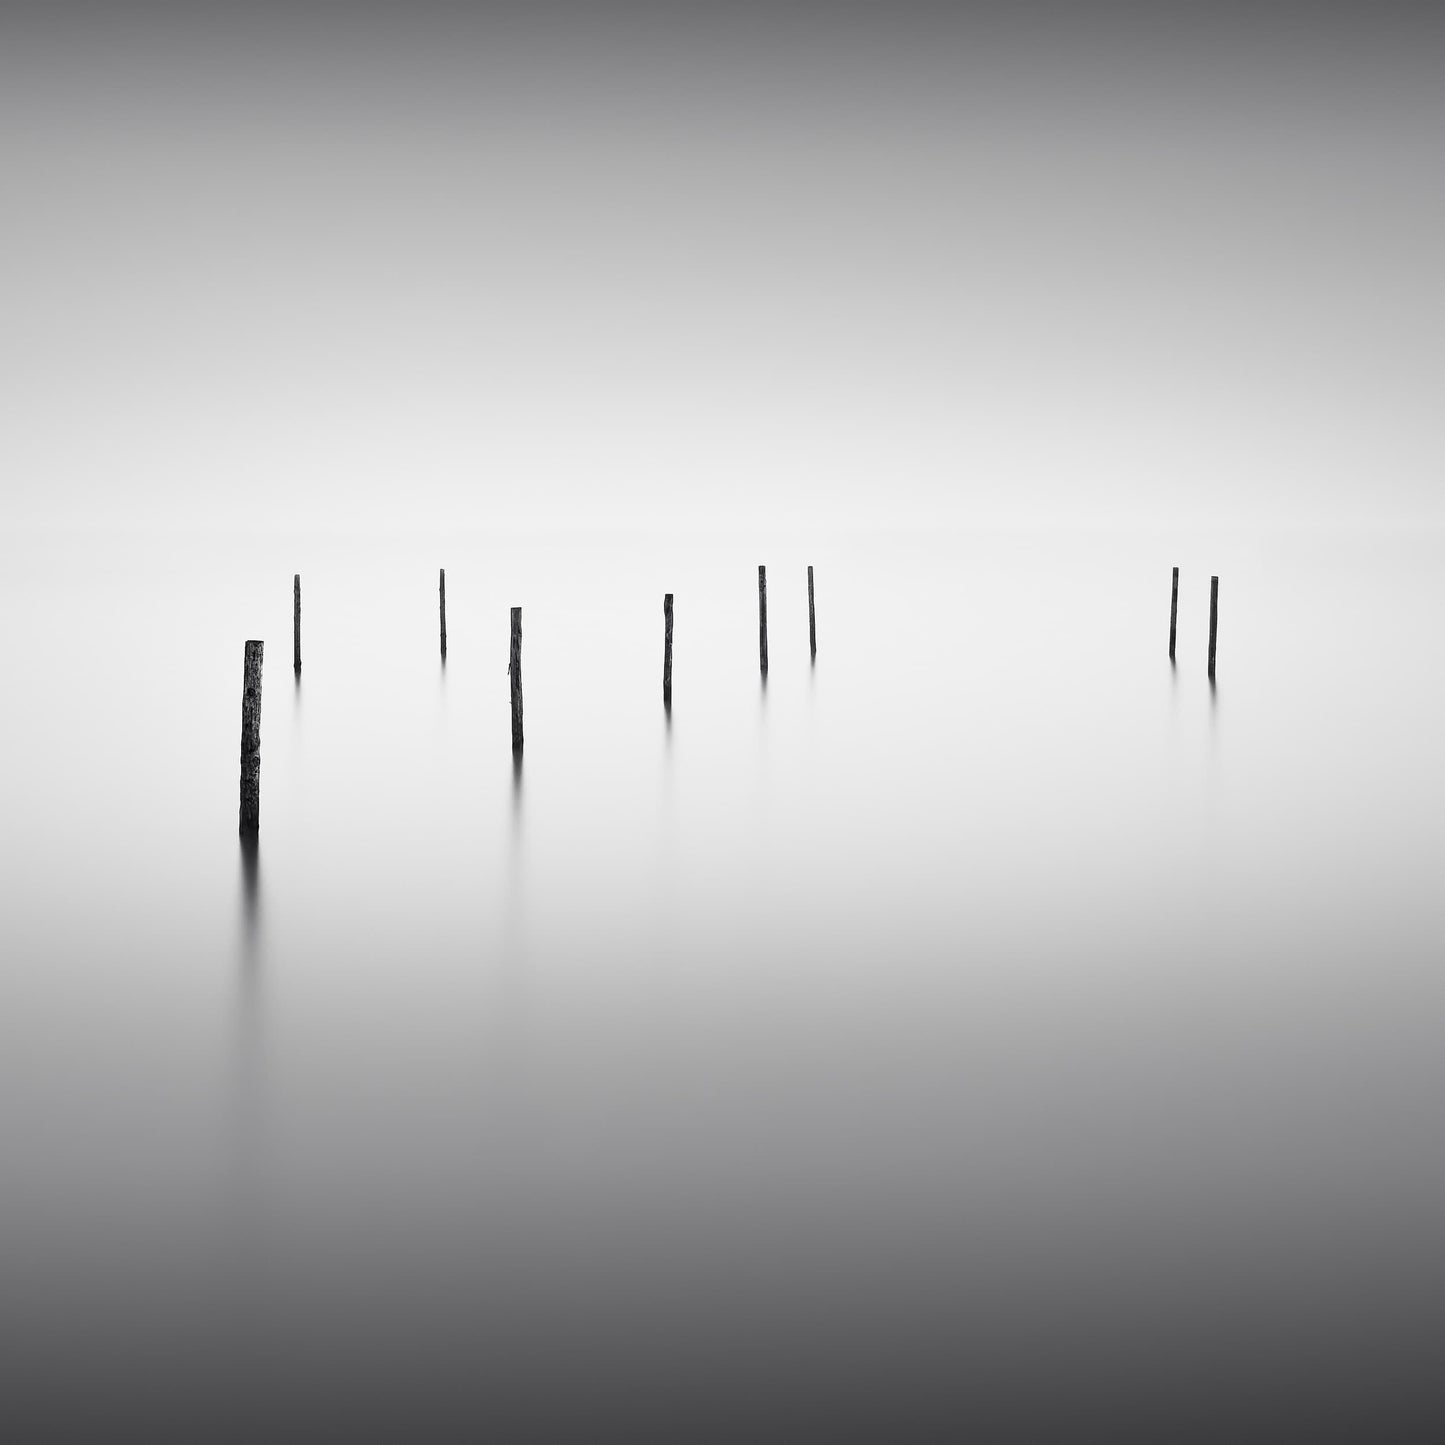 The artpiece 'Simplicity i' by Marco Maljaars shows a constellation of wooden poles coming up out of a foggy silent lake. Shot in black and white.